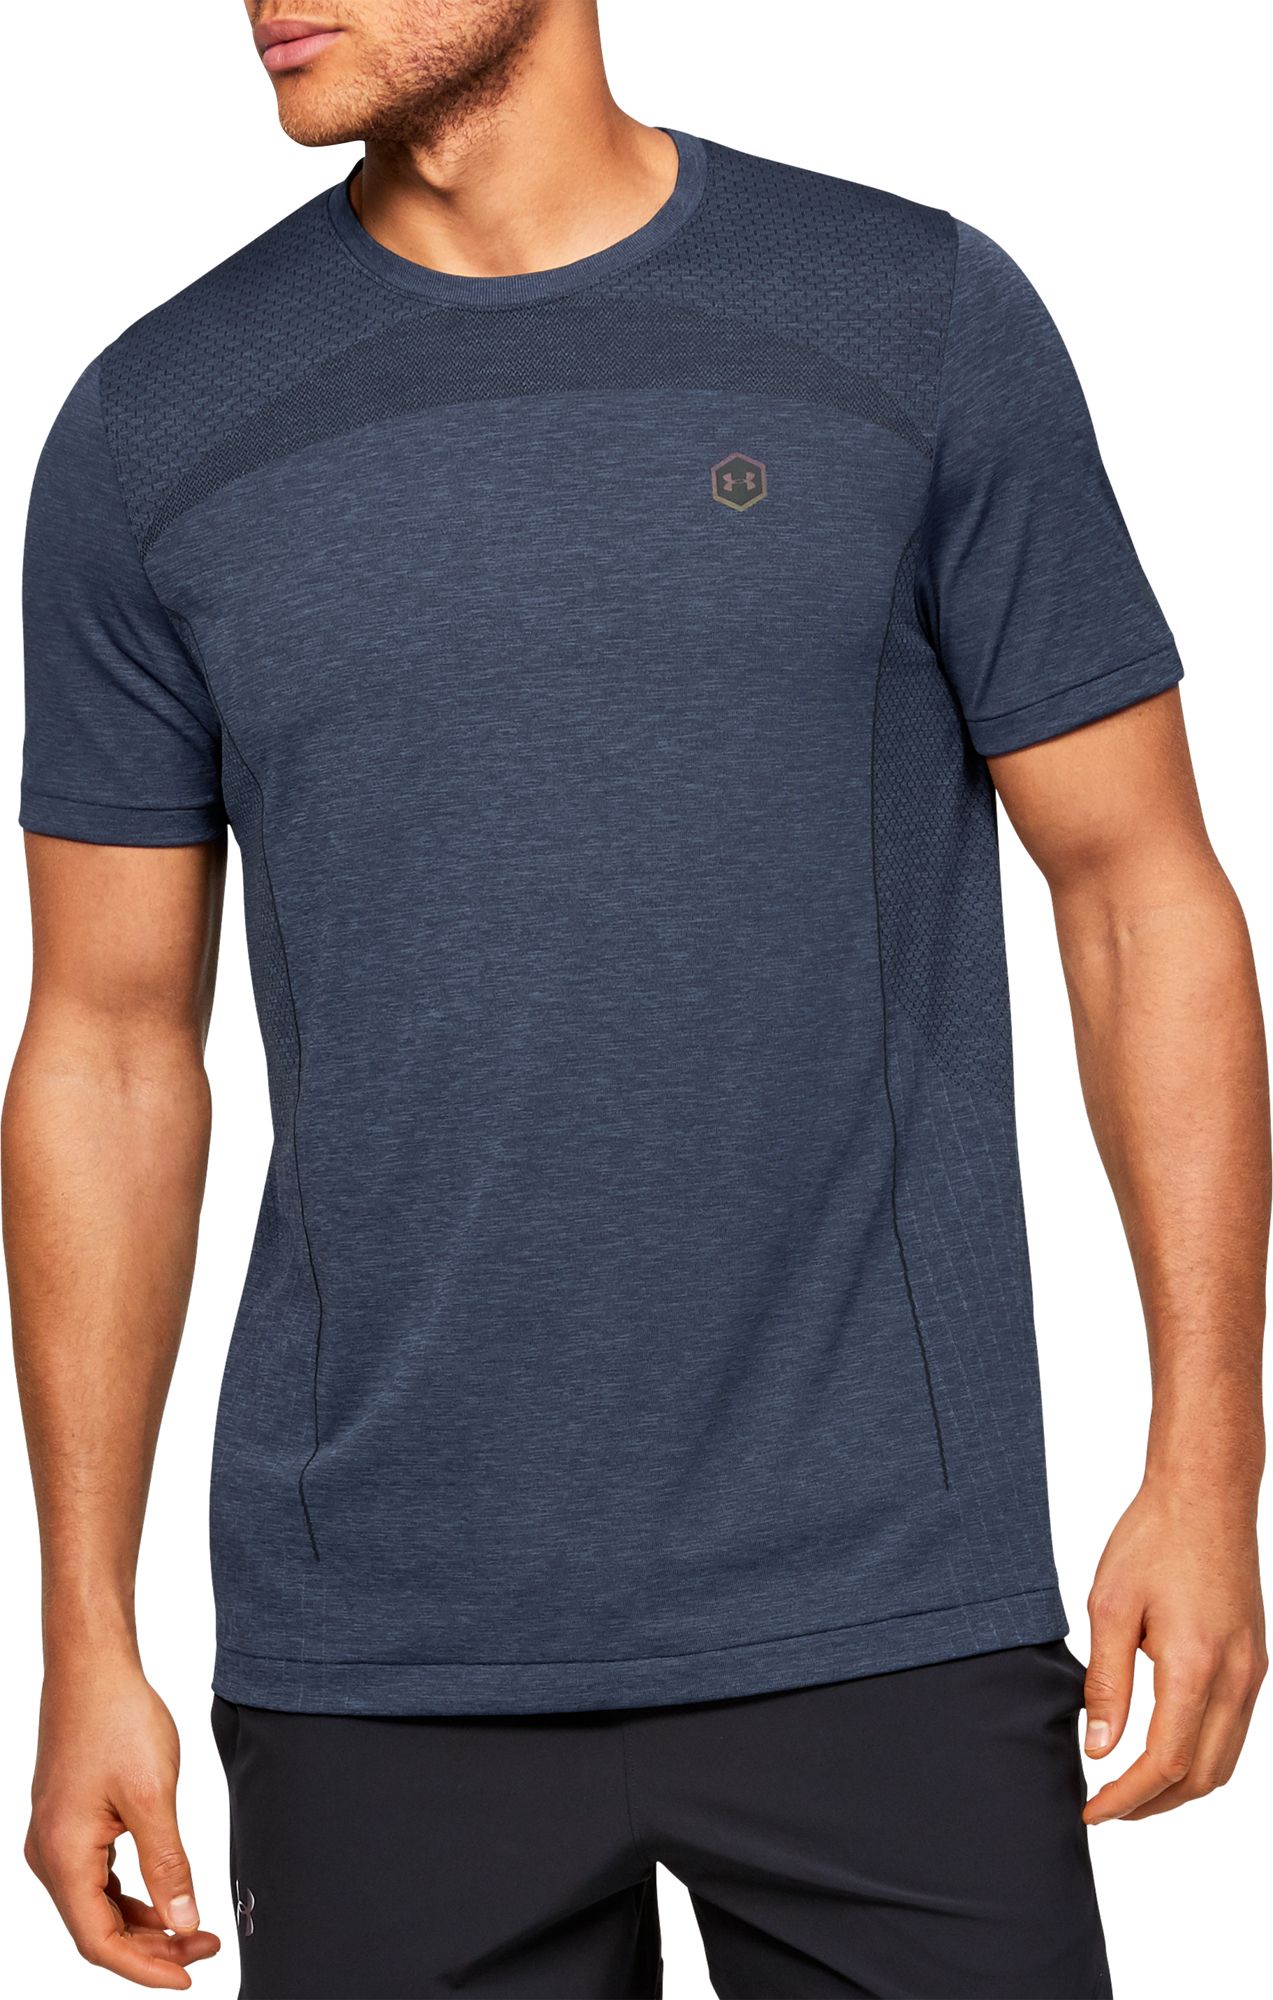 men's under armour fitted shirts